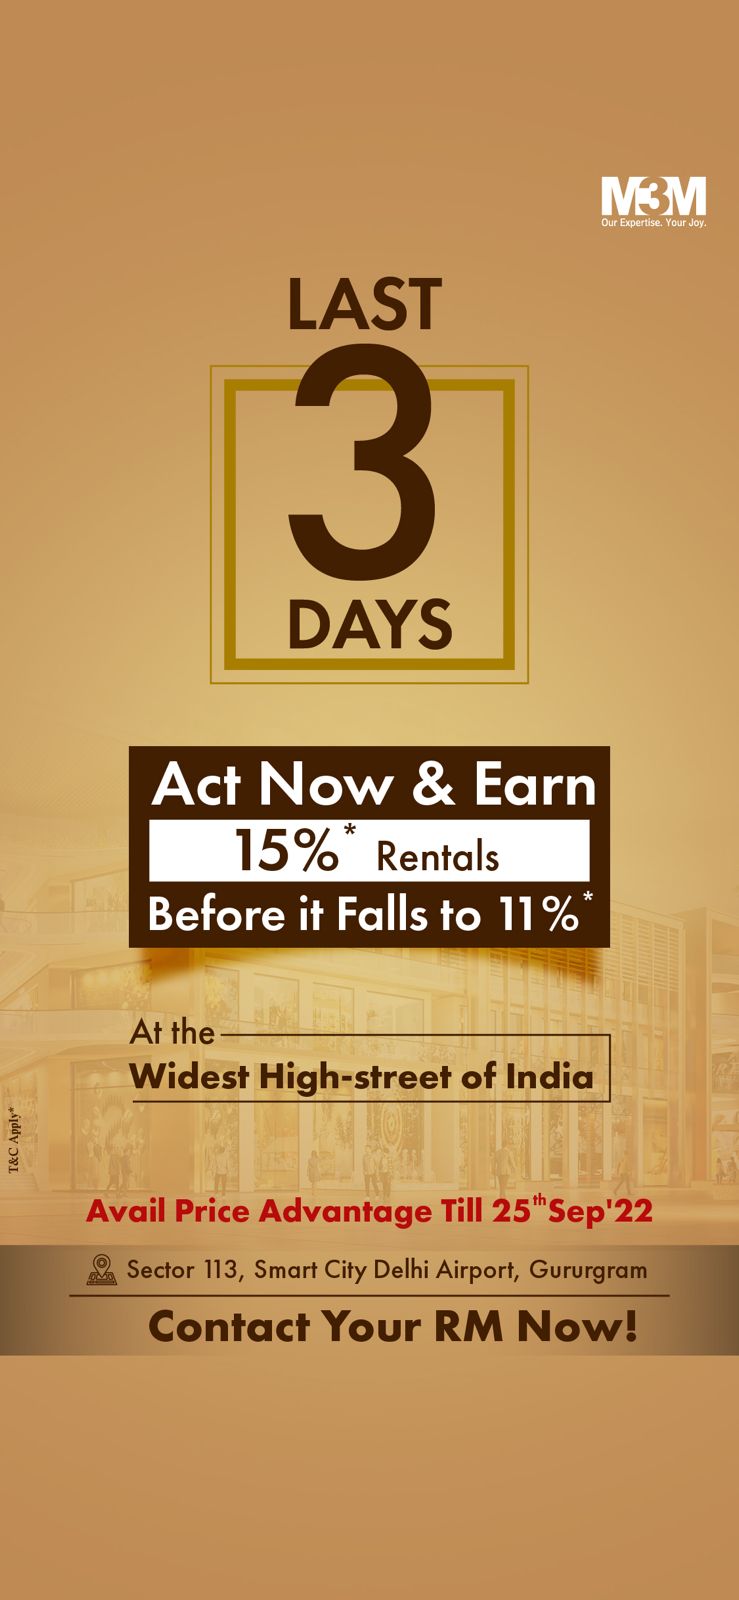 Last 3 days act now and earn 15% rentals before it falls to 12% at M3M SCO 113 Market, Gurgaon